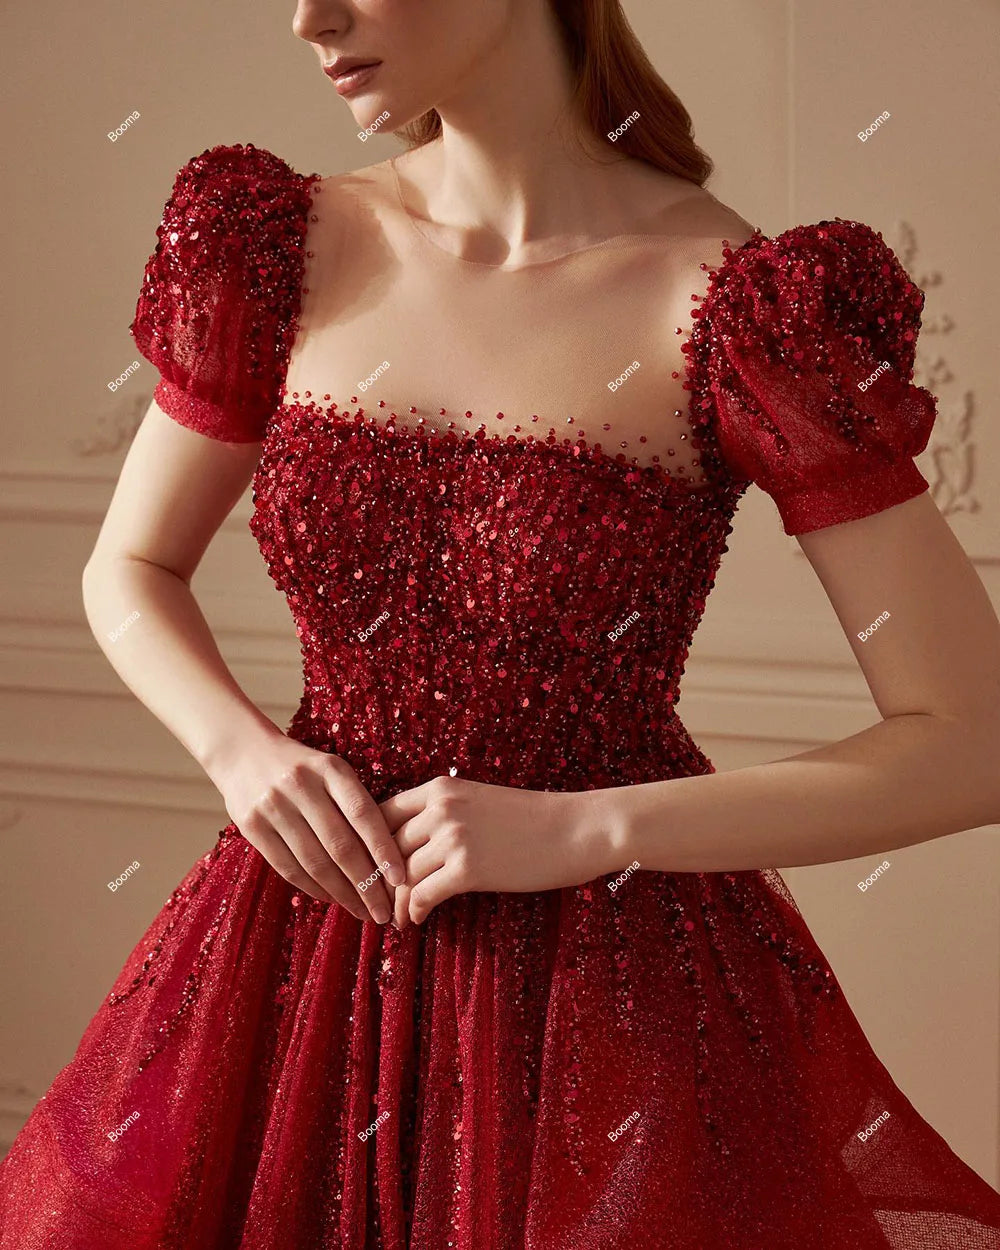 Red Glitter Wedding Dresses Square Collar Ruffles Prom Gowns Sequined Princess Bridals Evening Dress for Women with Train